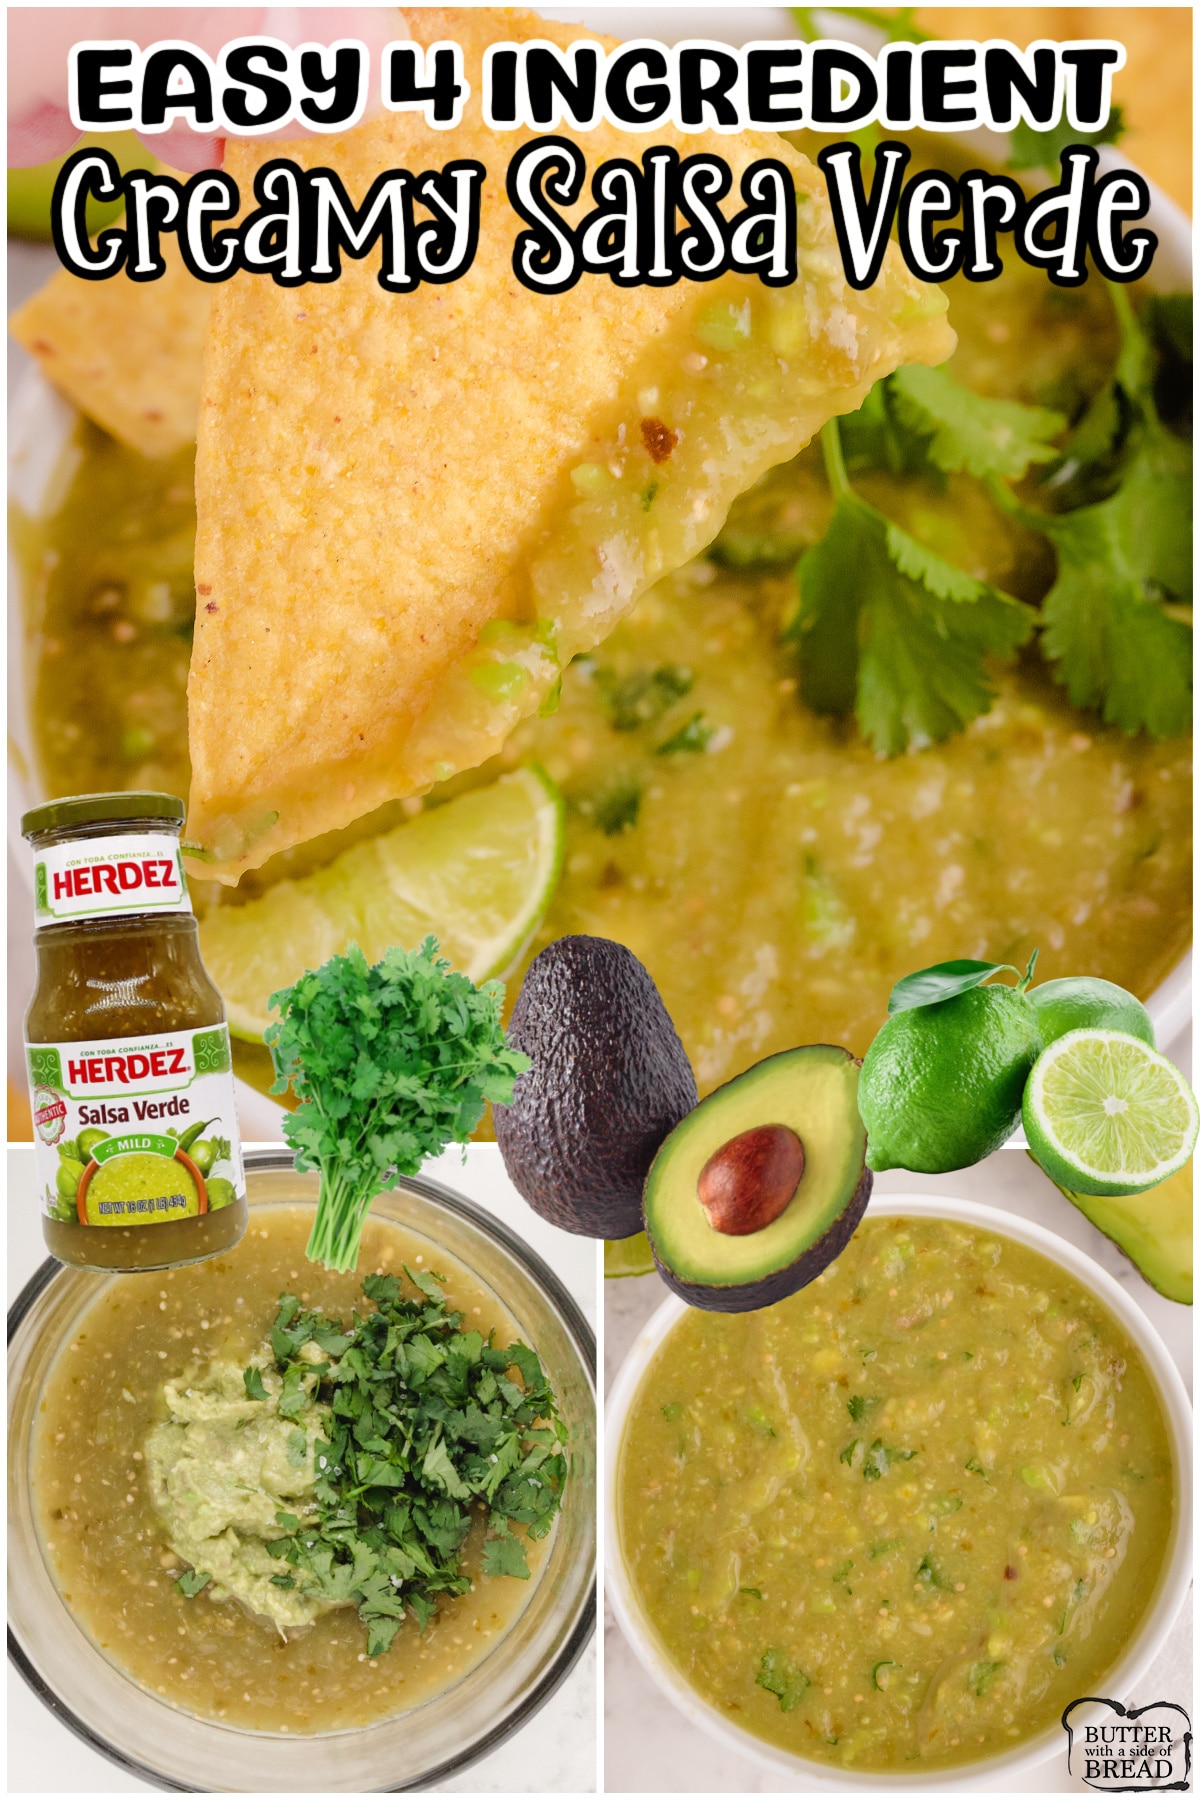 Creamy Salsa Verde made with 4 ingredients & is perfect to serve alongside tacos, enchiladas, or just eaten with chips! Creamy, tangy green salsa dip with bright fresh cilantro lime flavors that everyone goes crazy over! 